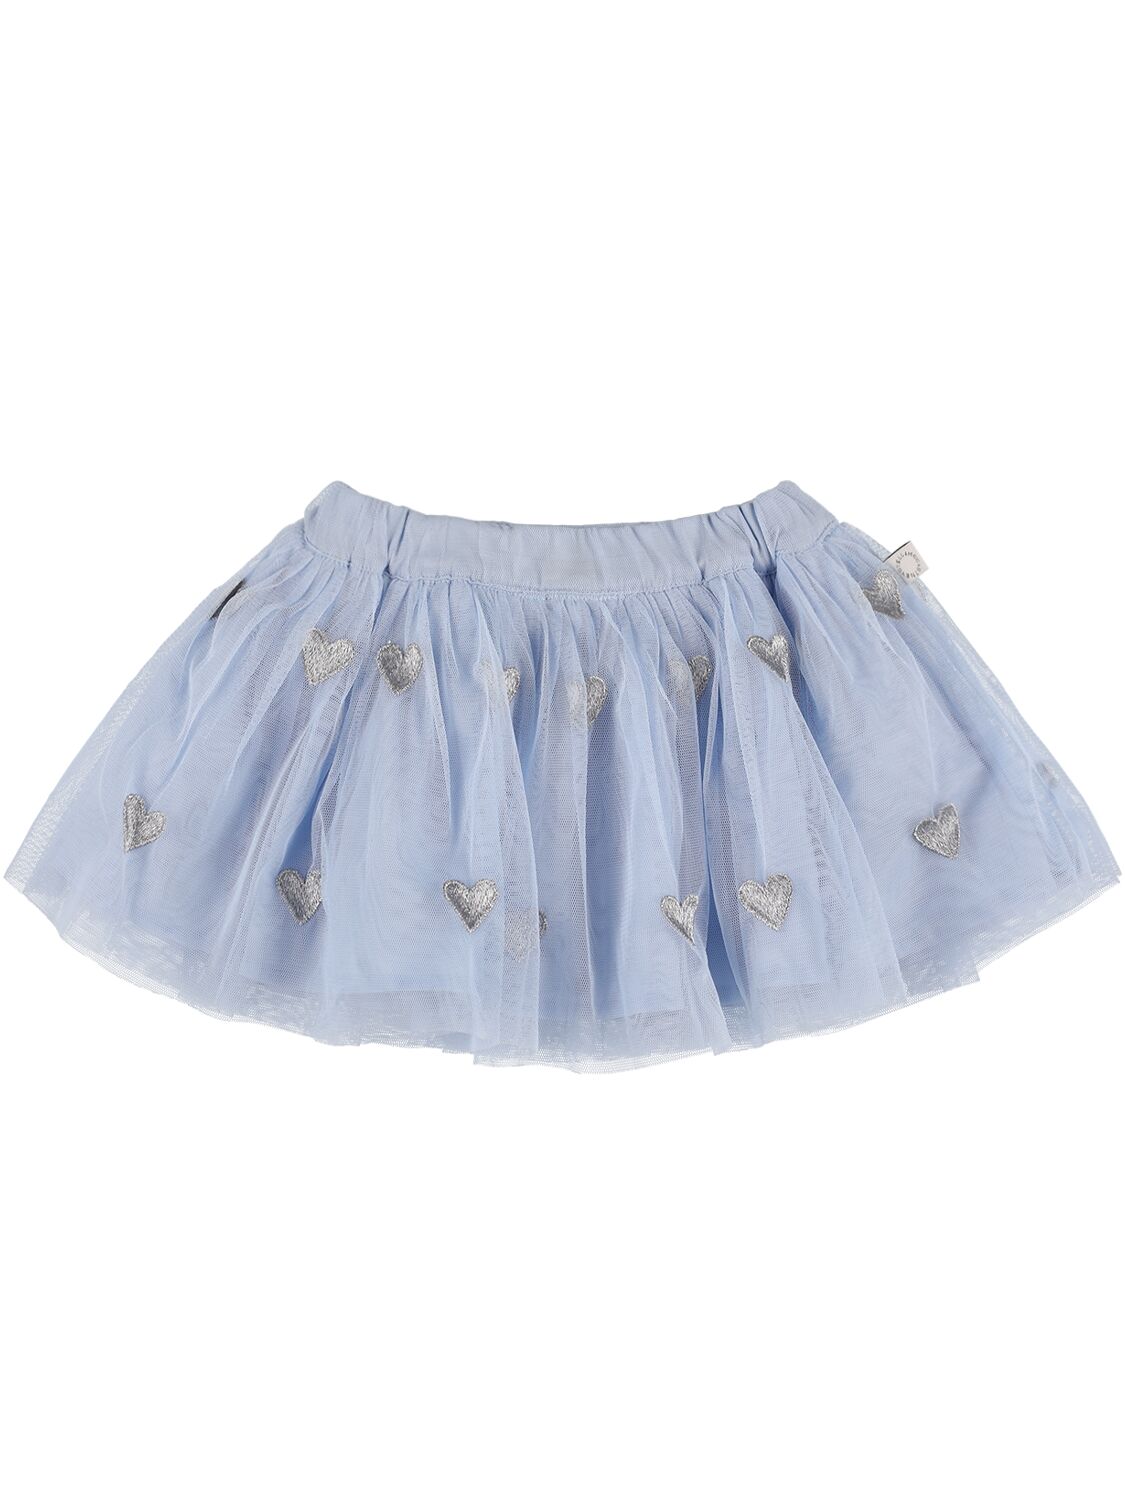 Stella Mccartney Kids' Recycled Poly Tulle Skirt W/ Patches In Light Blue